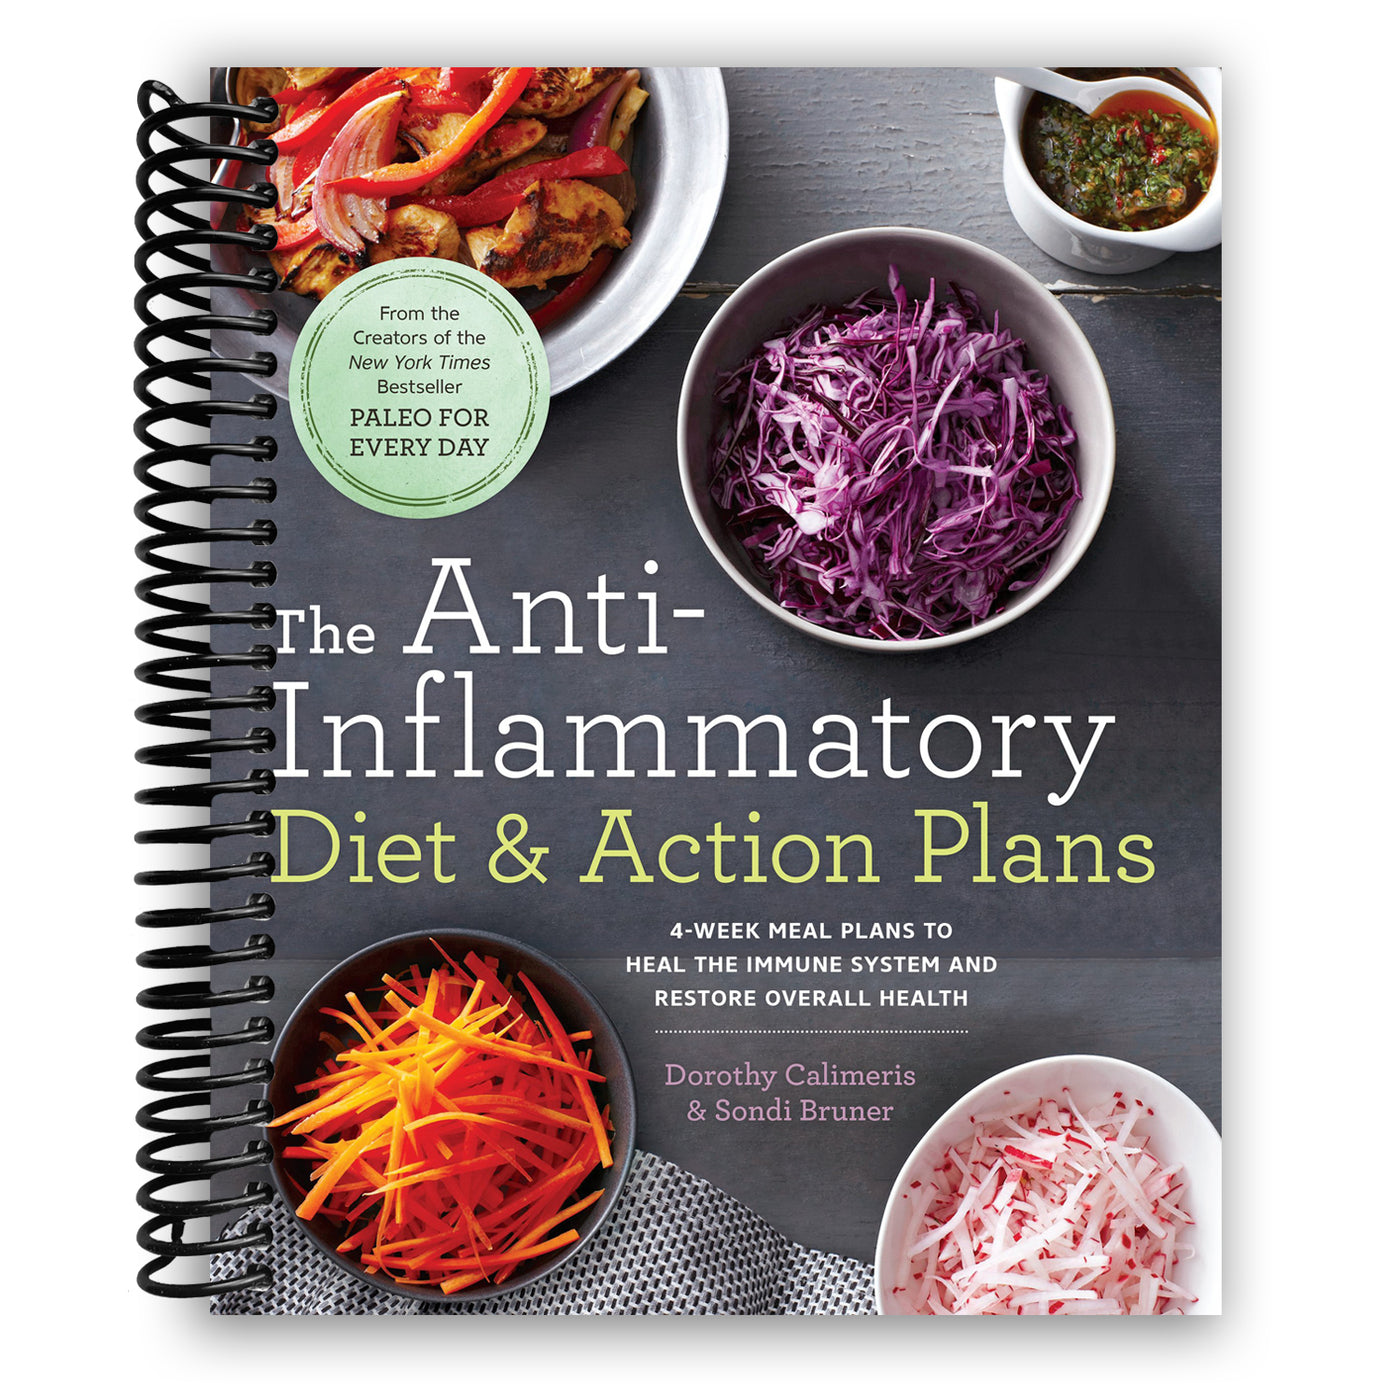 The Anti-Inflammatory Diet & Action Plans: 4-Week Meal Plans to Heal the Immune System and Restore Overall Health (Spiral Bound)